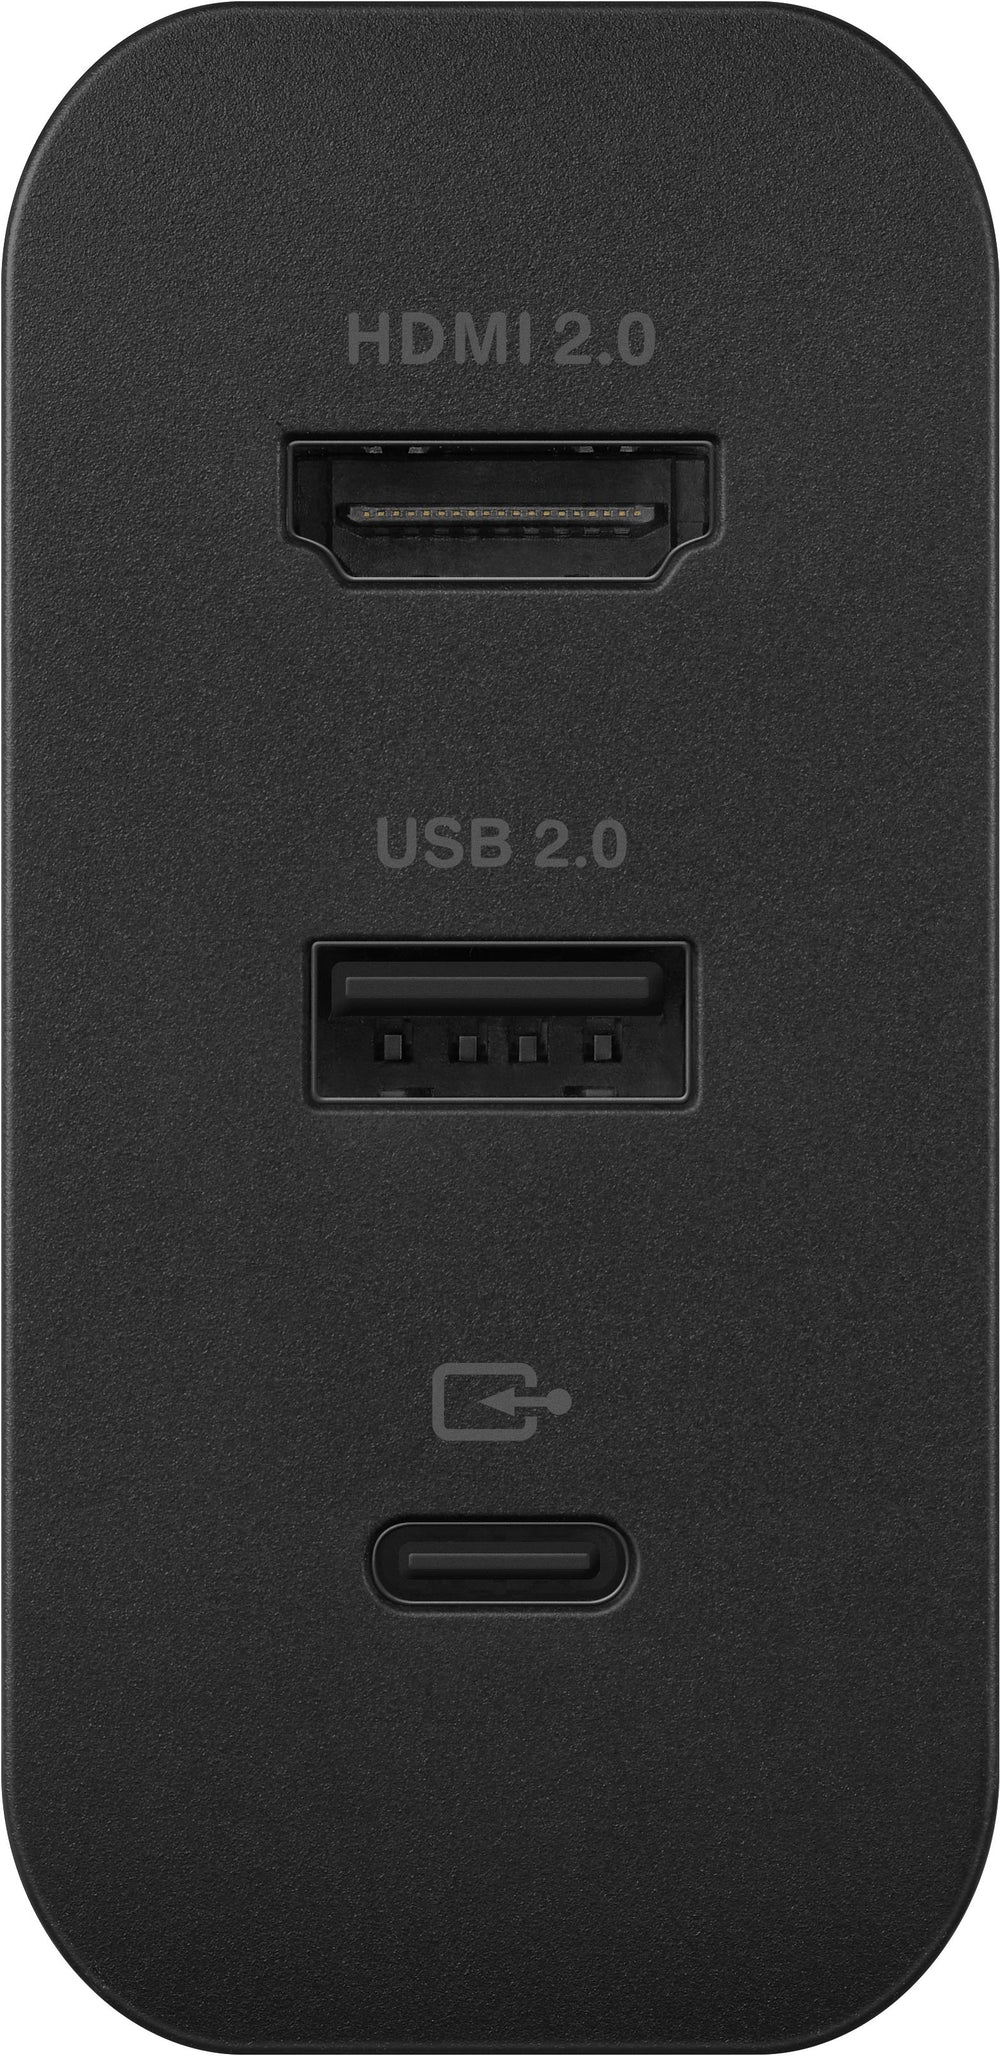 ASUS - ROG 65W Charger Dock - Supports HDMI 2.0 with USB Type-A and USB Type-C for ROG Ally - Black_1